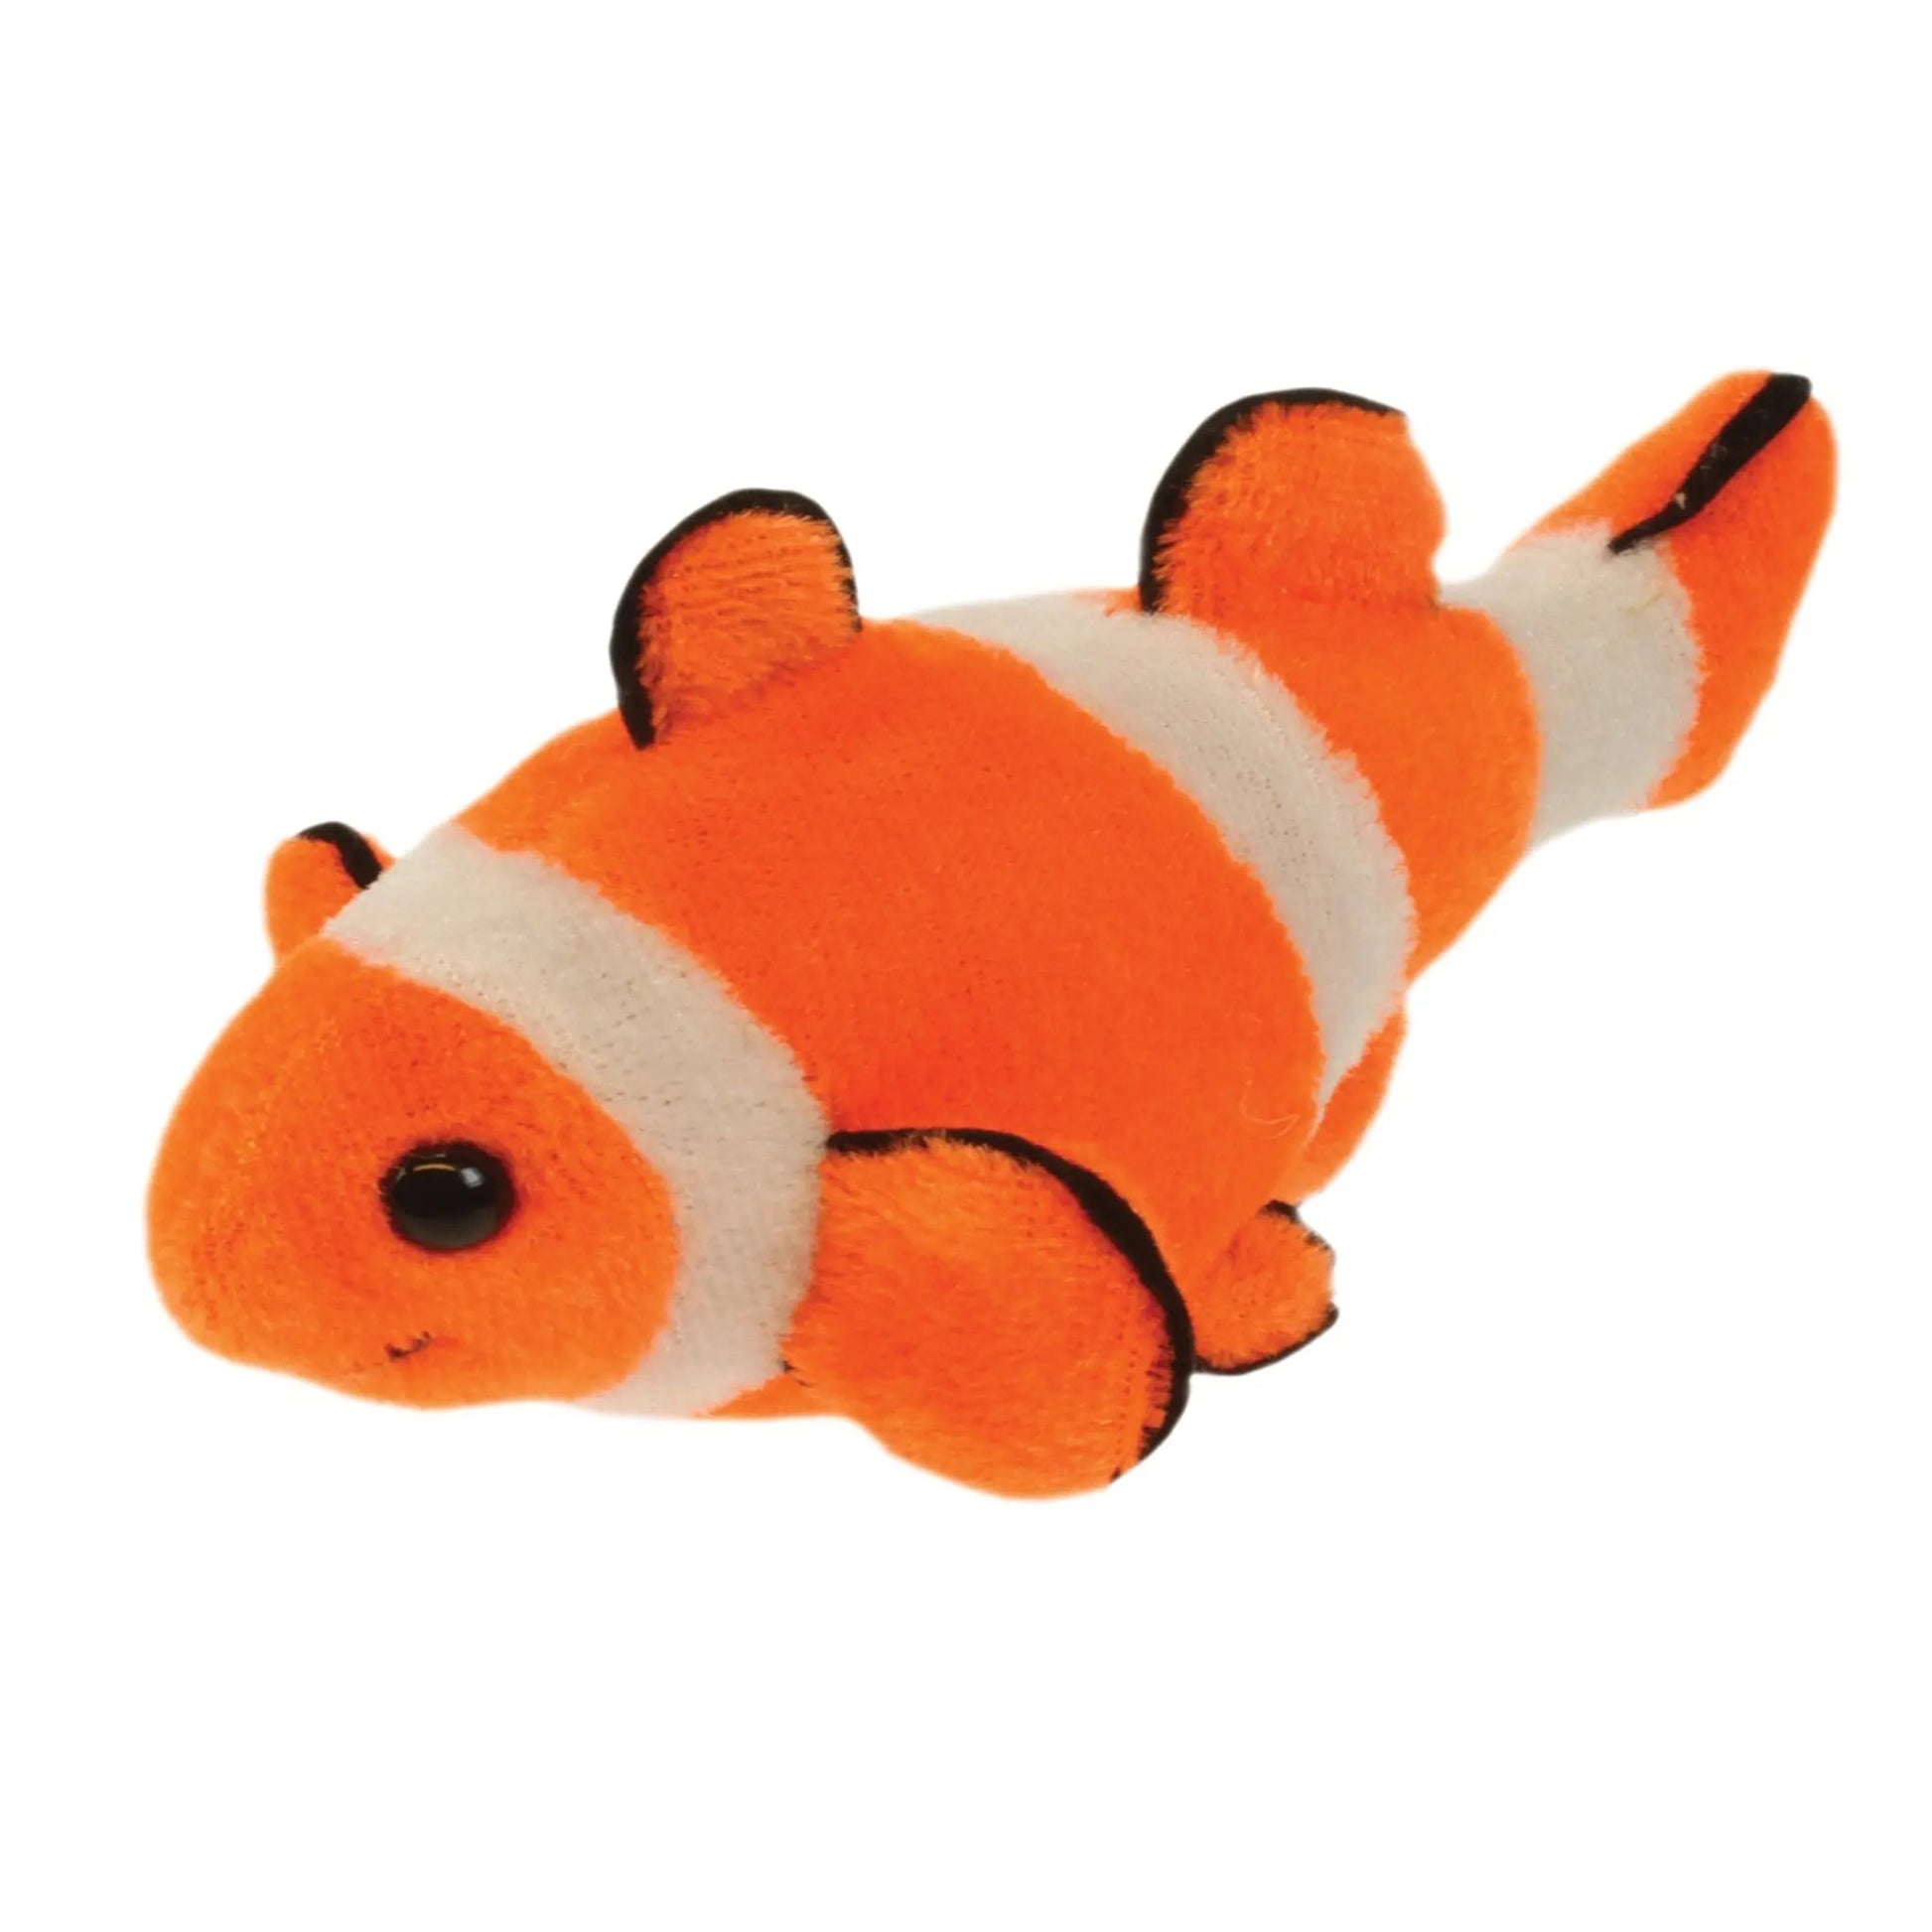 Clown Fish Finger Puppet - The Puppet Company - The Forgotten Toy Shop